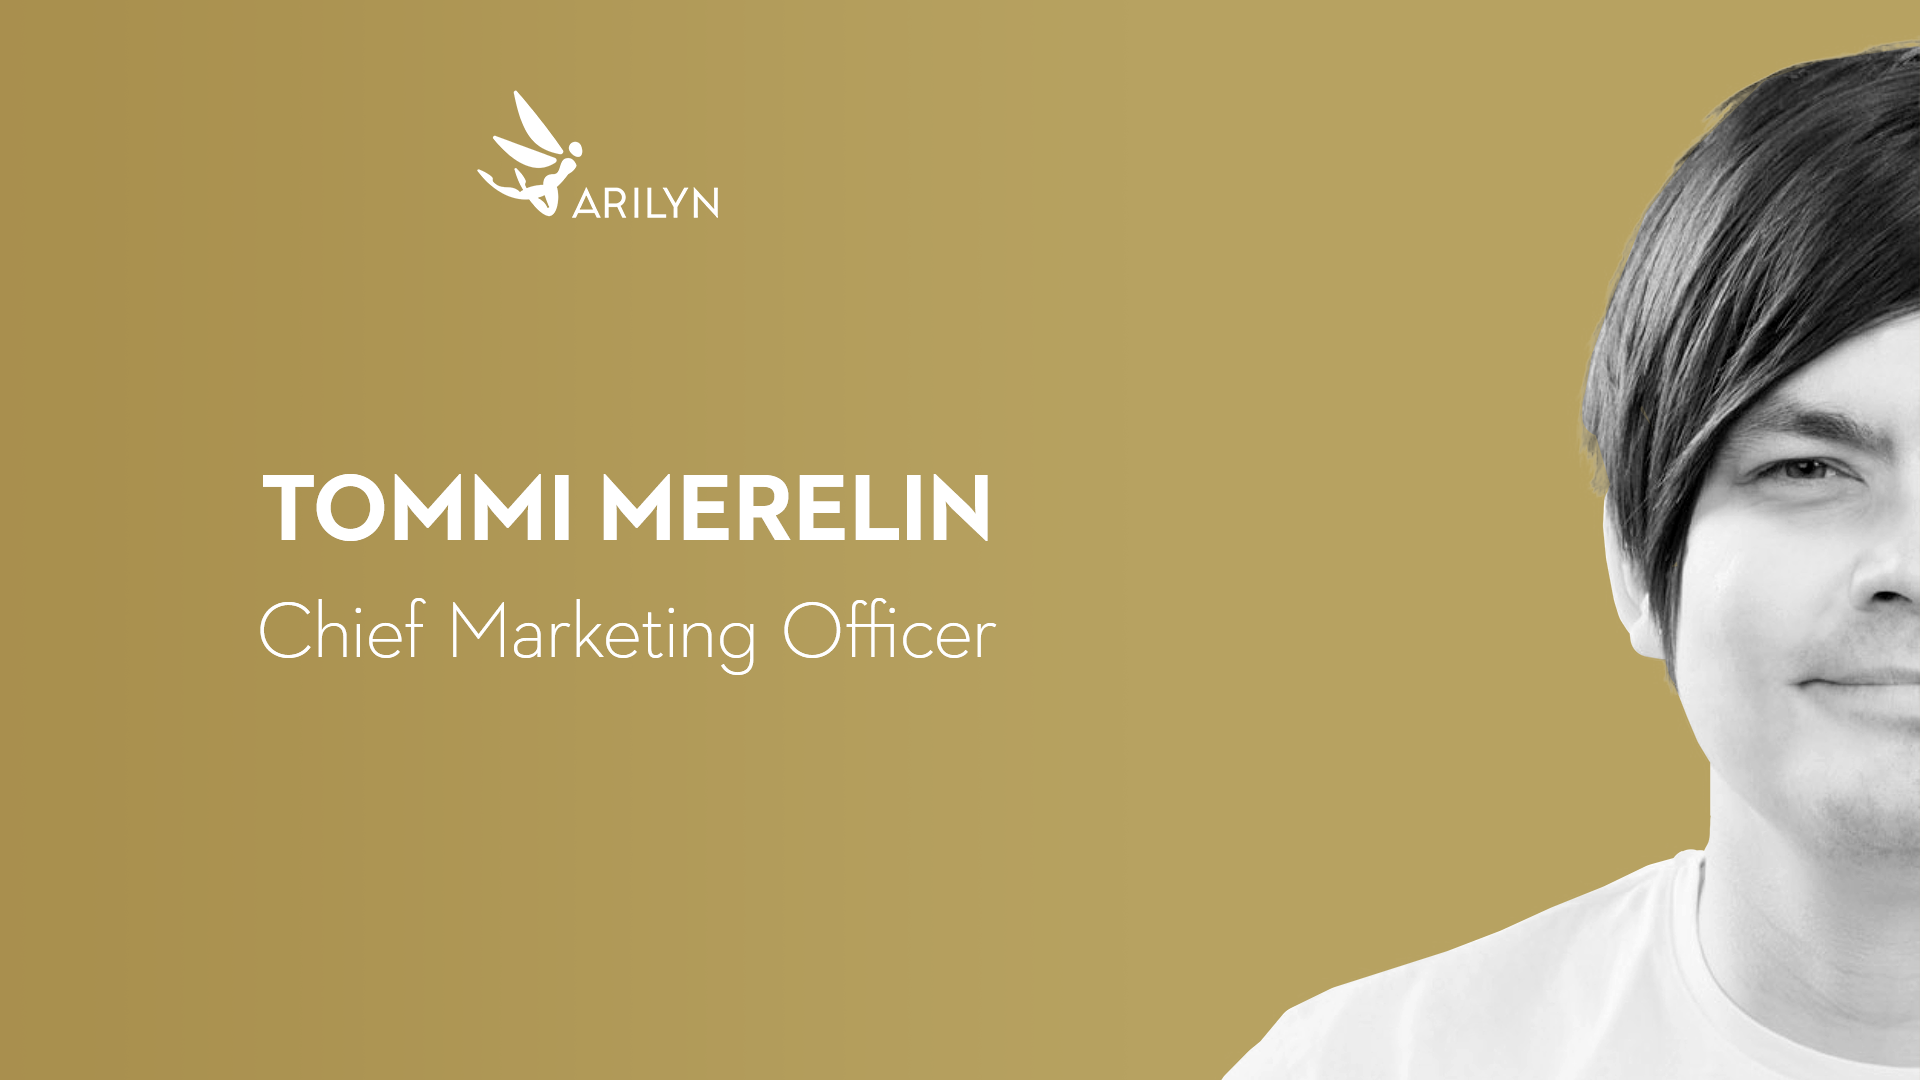 Get to know Arilyn – Tommi, CMO